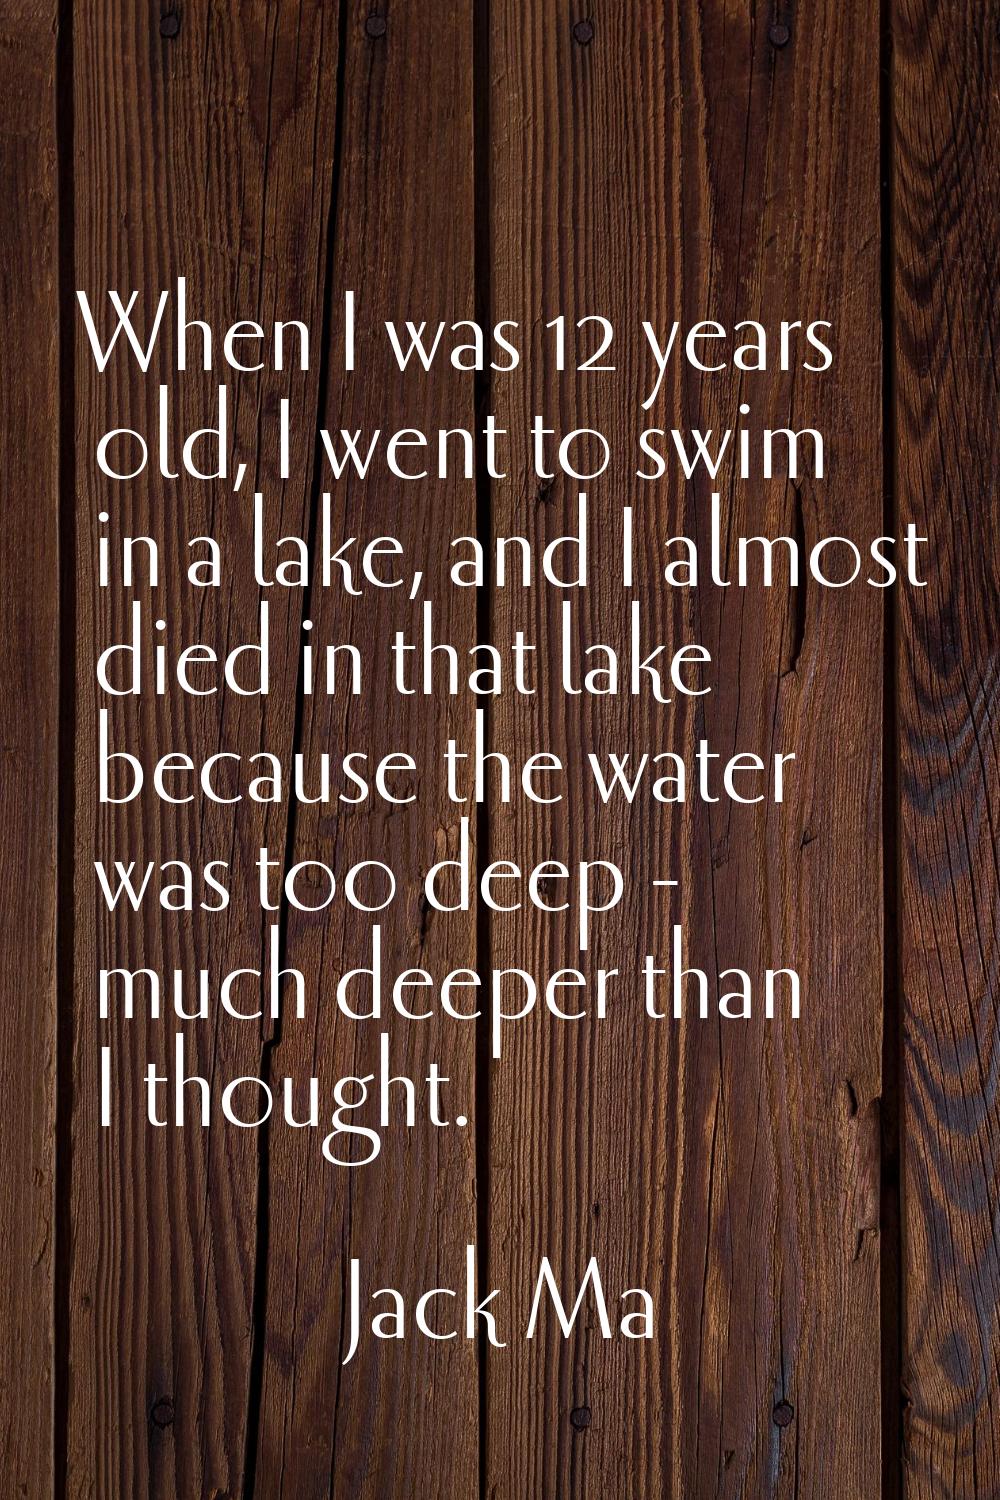 When I was 12 years old, I went to swim in a lake, and I almost died in that lake because the water